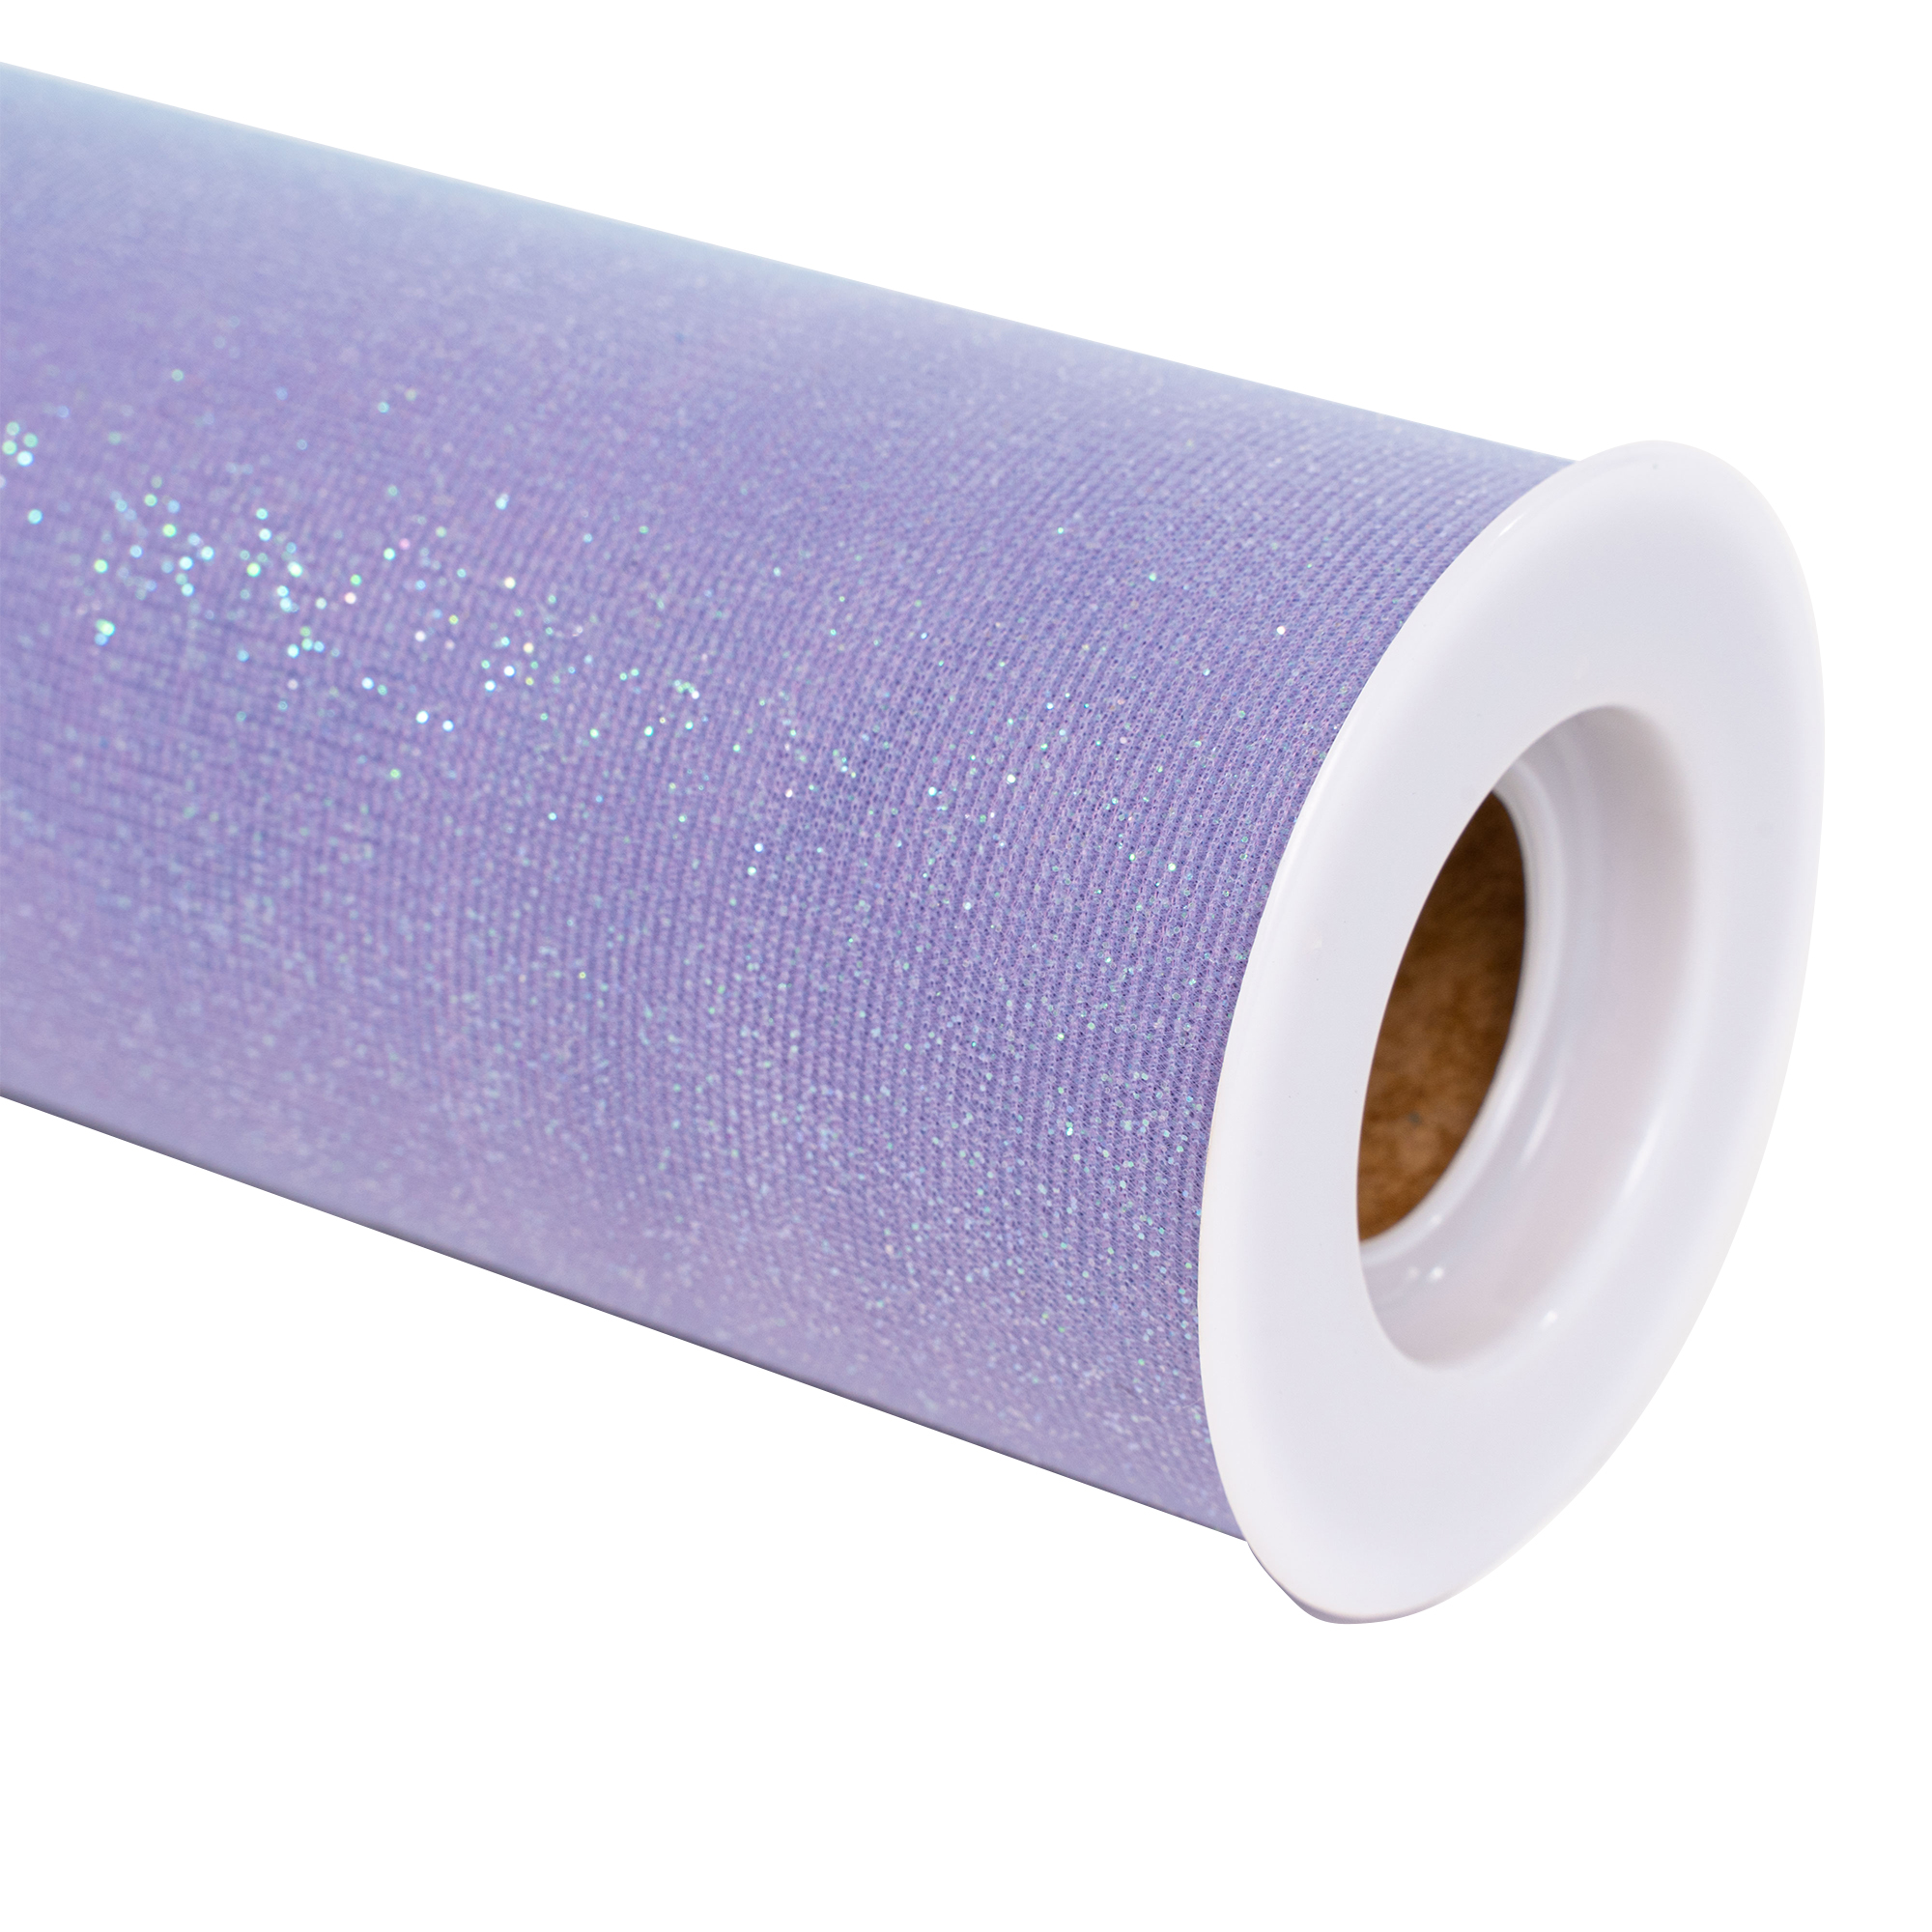 Glittered Tulle Rolls 6" x 10yds Rainbow Color